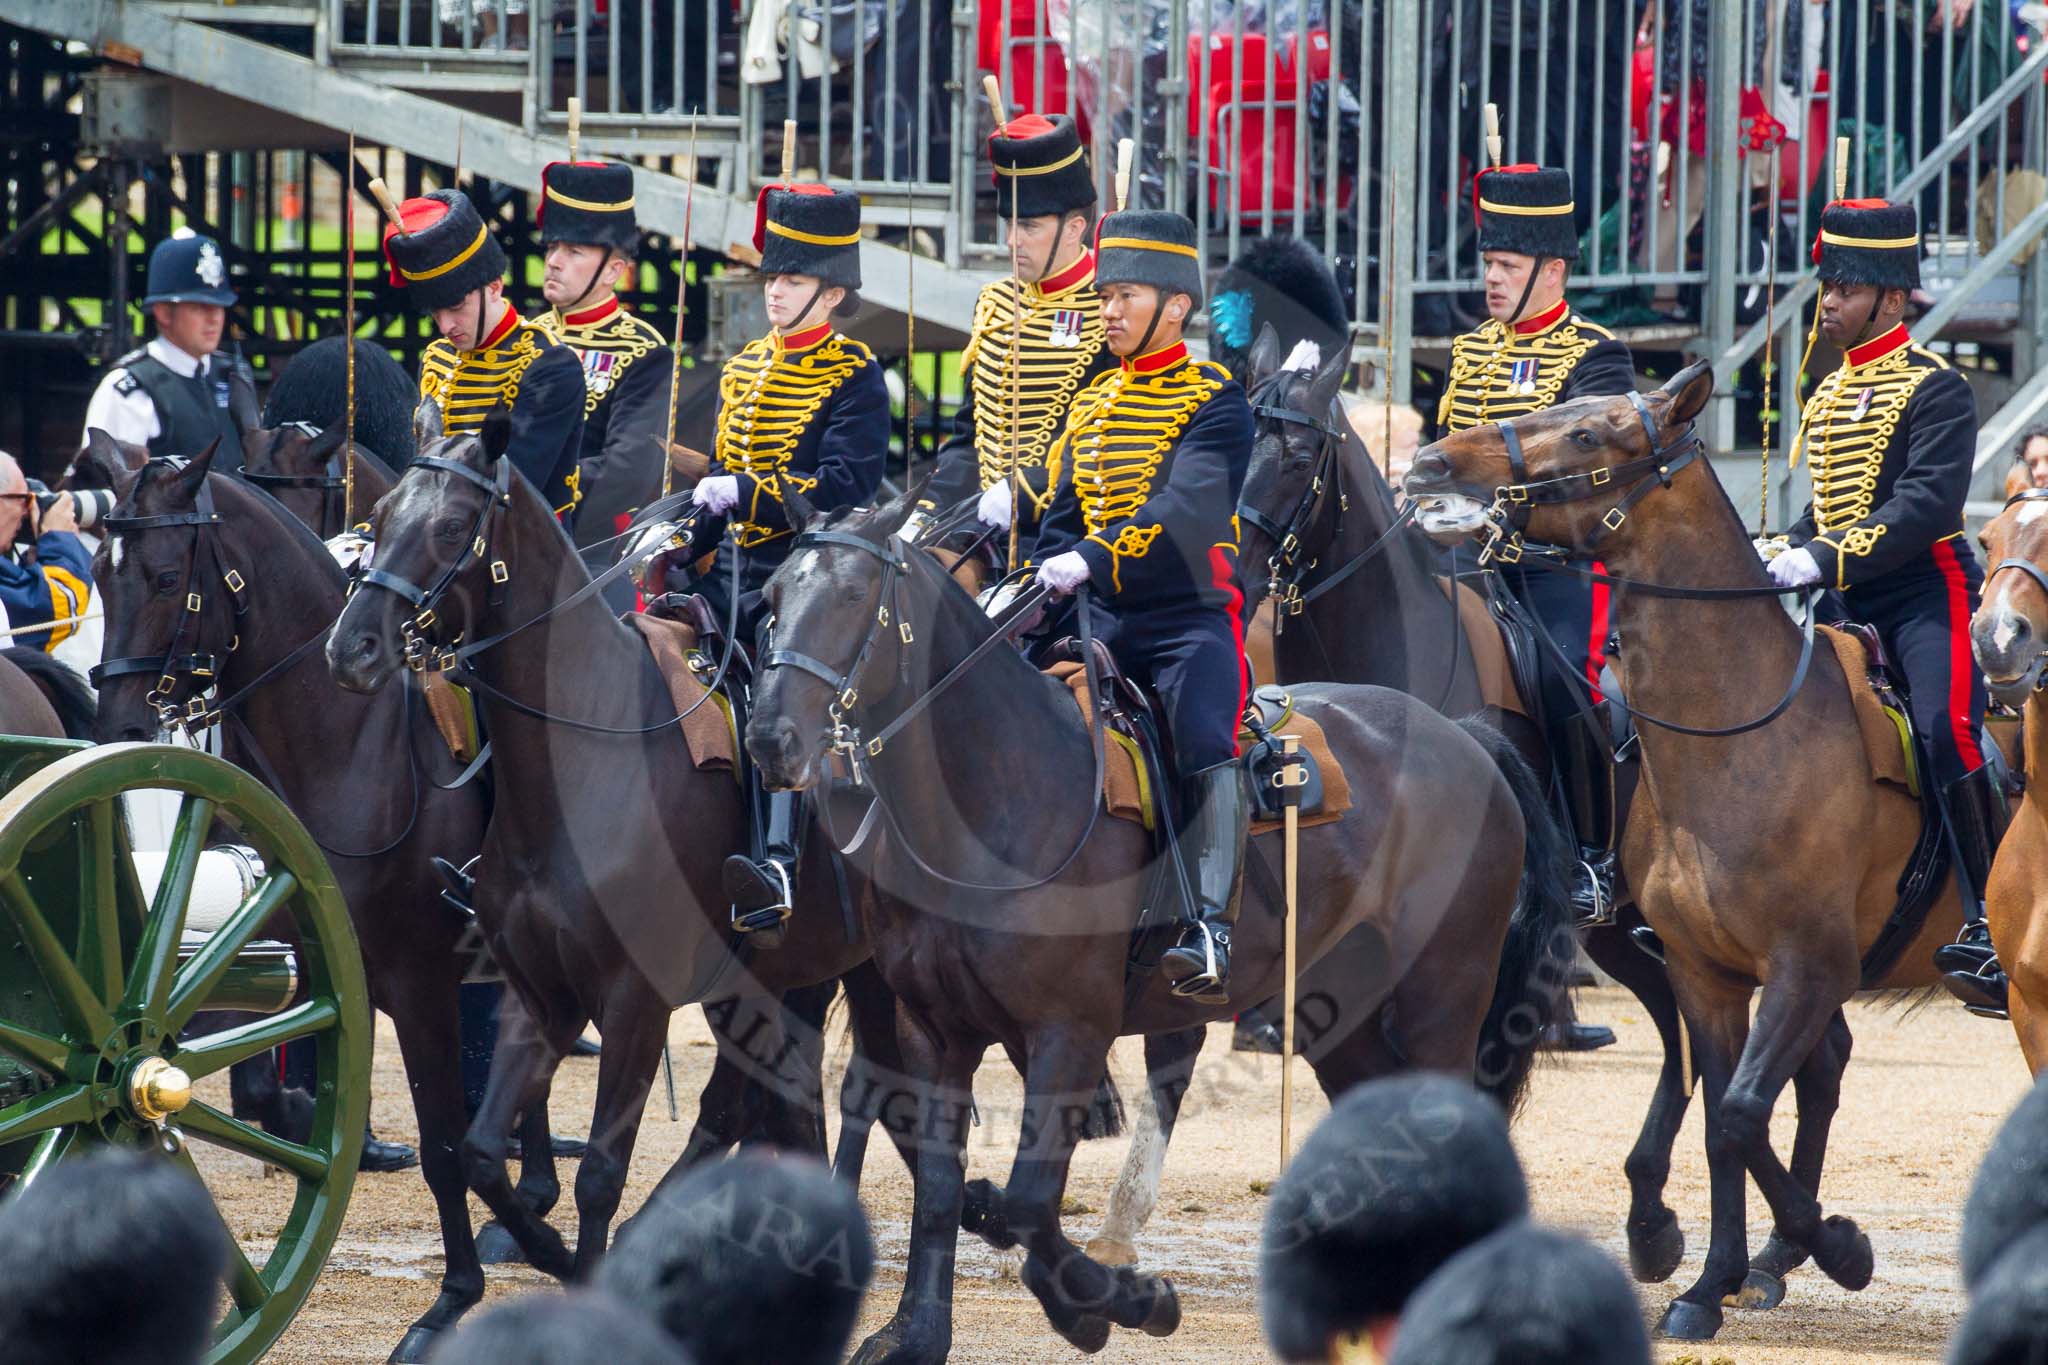 The Colonel's Review 2014.
Horse Guards Parade, Westminster,
London,

United Kingdom,
on 07 June 2014 at 11:57, image #661